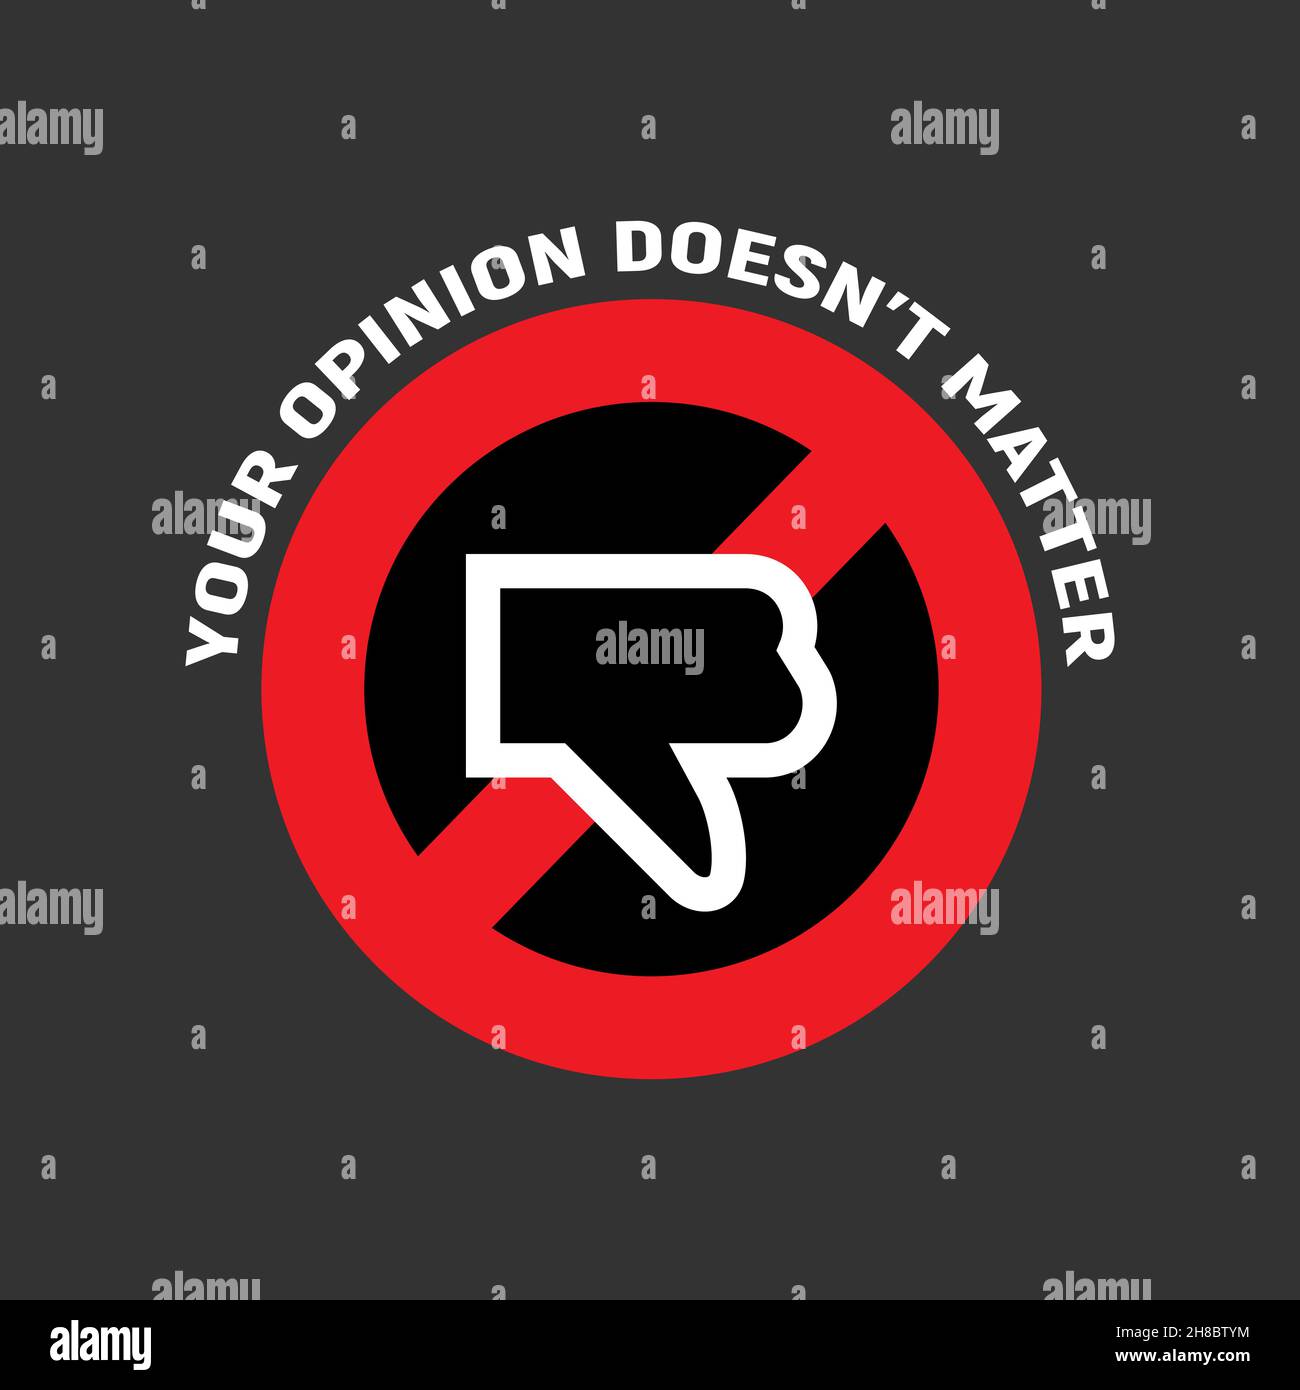 dislike sign with slogan concept of cancellation of dislikes in social media and community users protest. Stock Vector